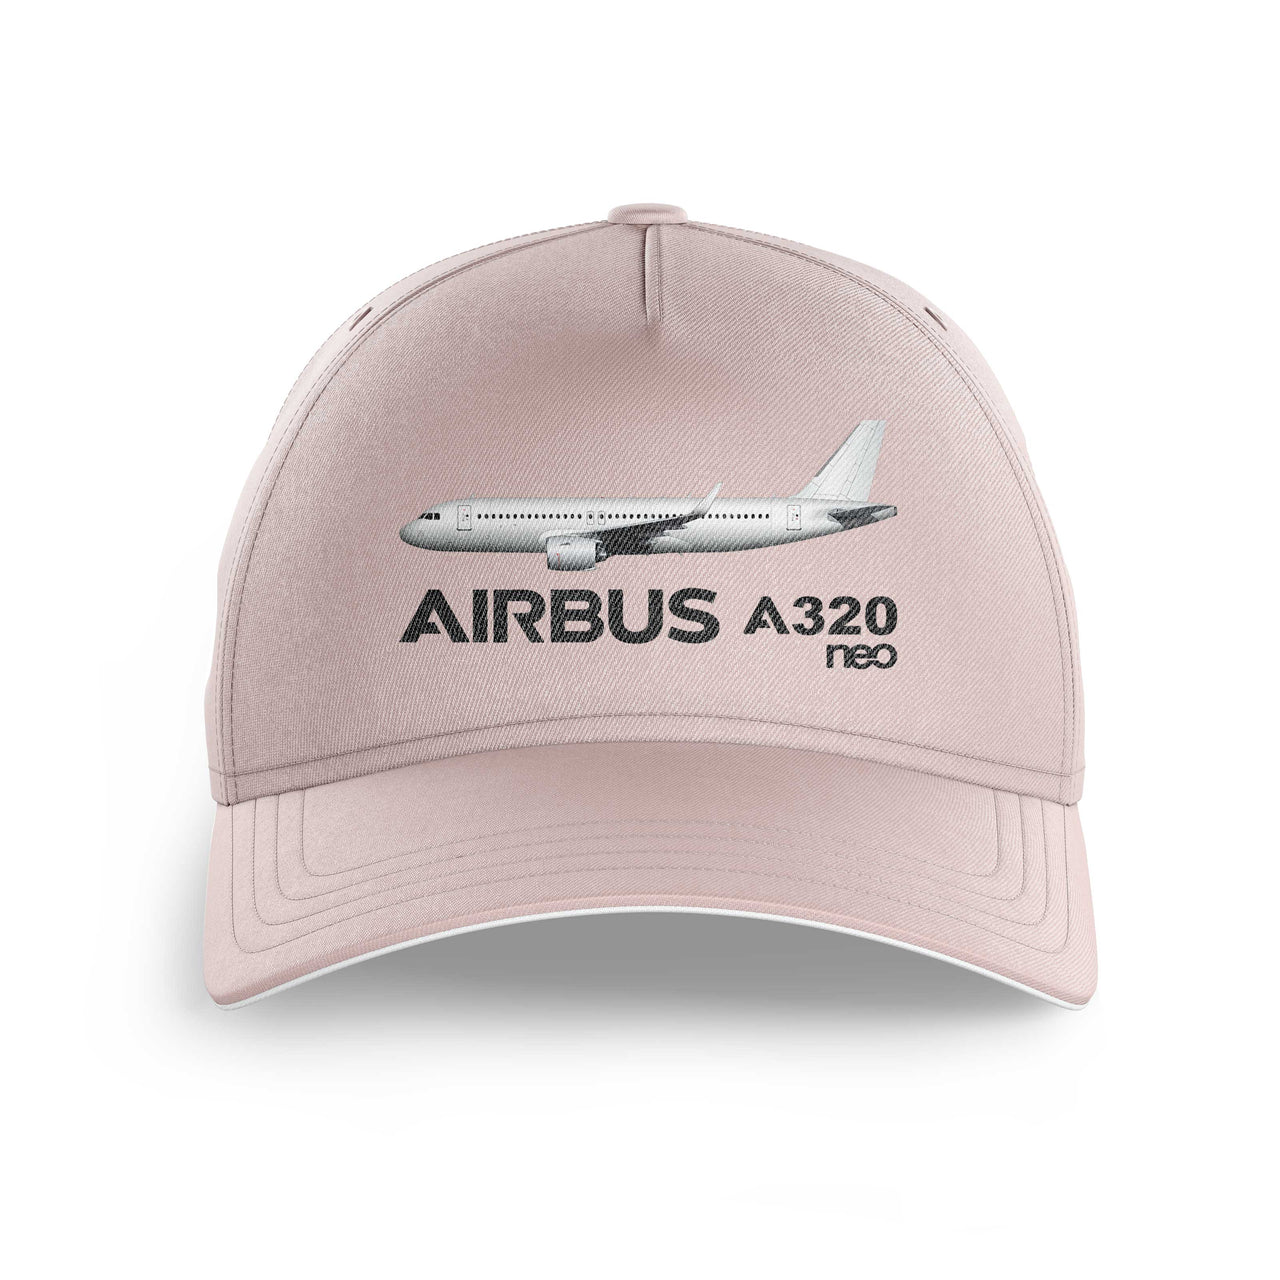 The Airbus A320Neo Printed Hats